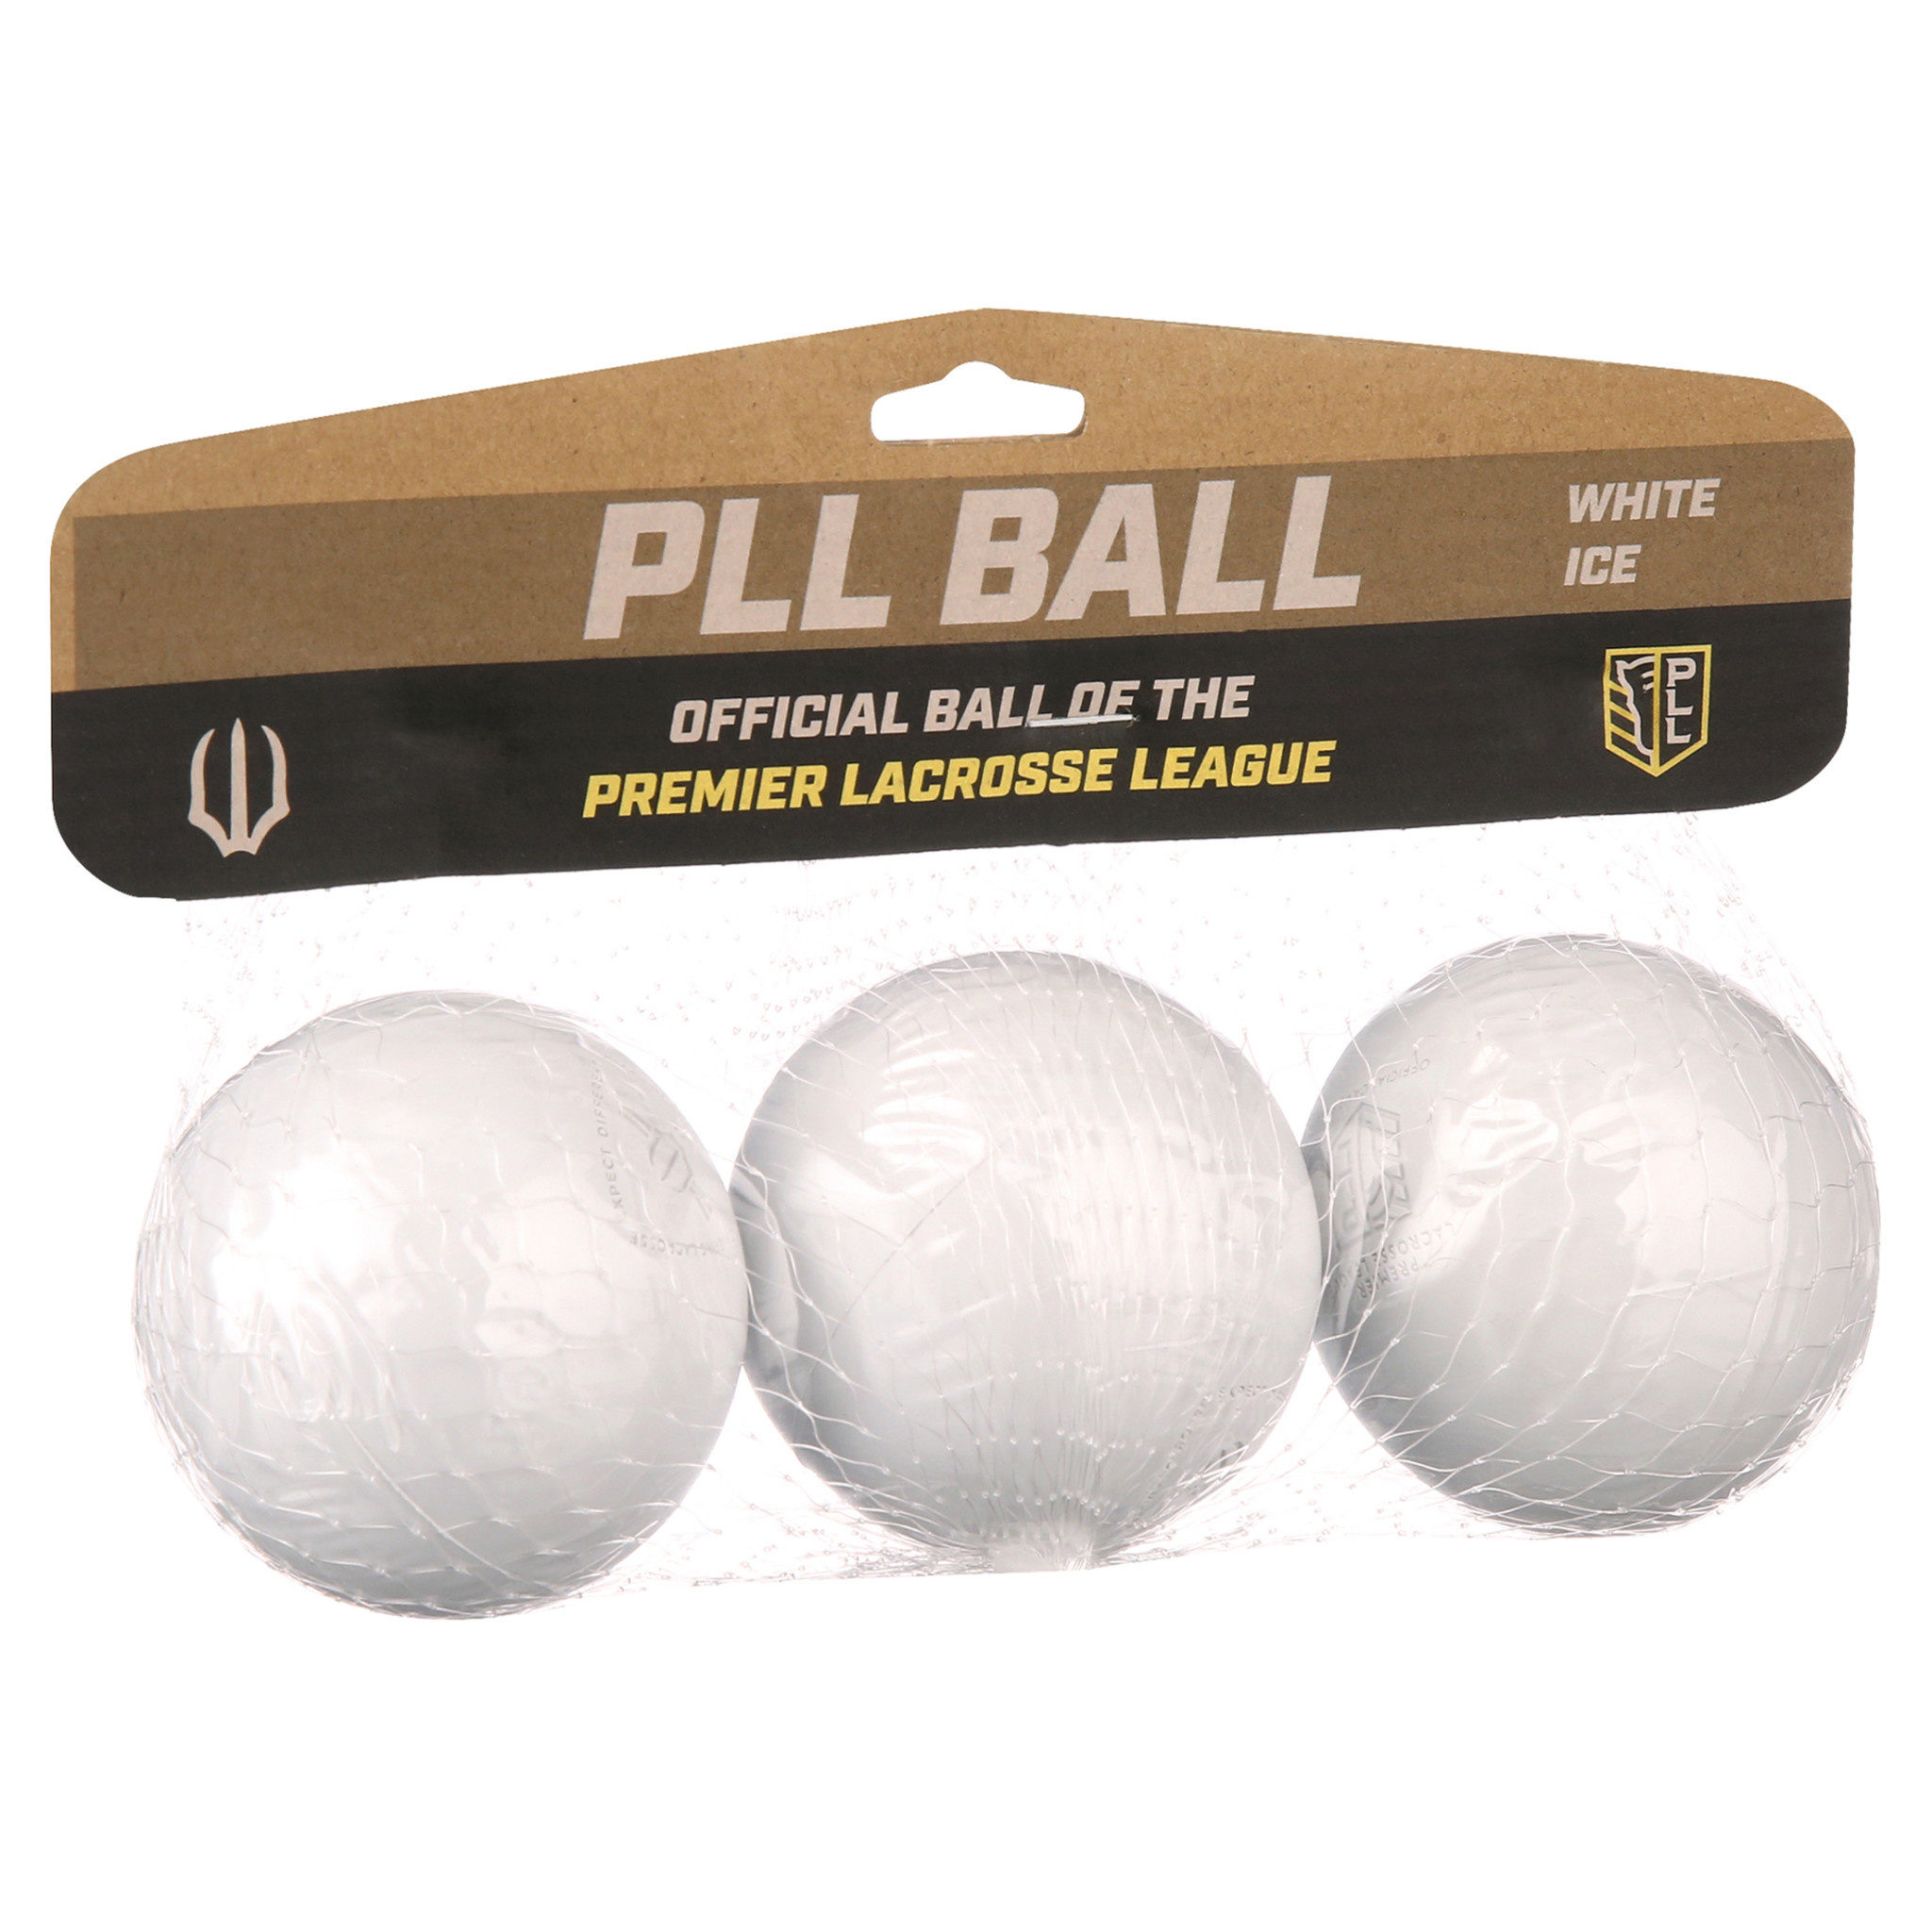 EPOCH WOLF ATHLETICS PREMIERE OFFICIAL PLL GAME BALL - WHITE ICE - 3 PACK